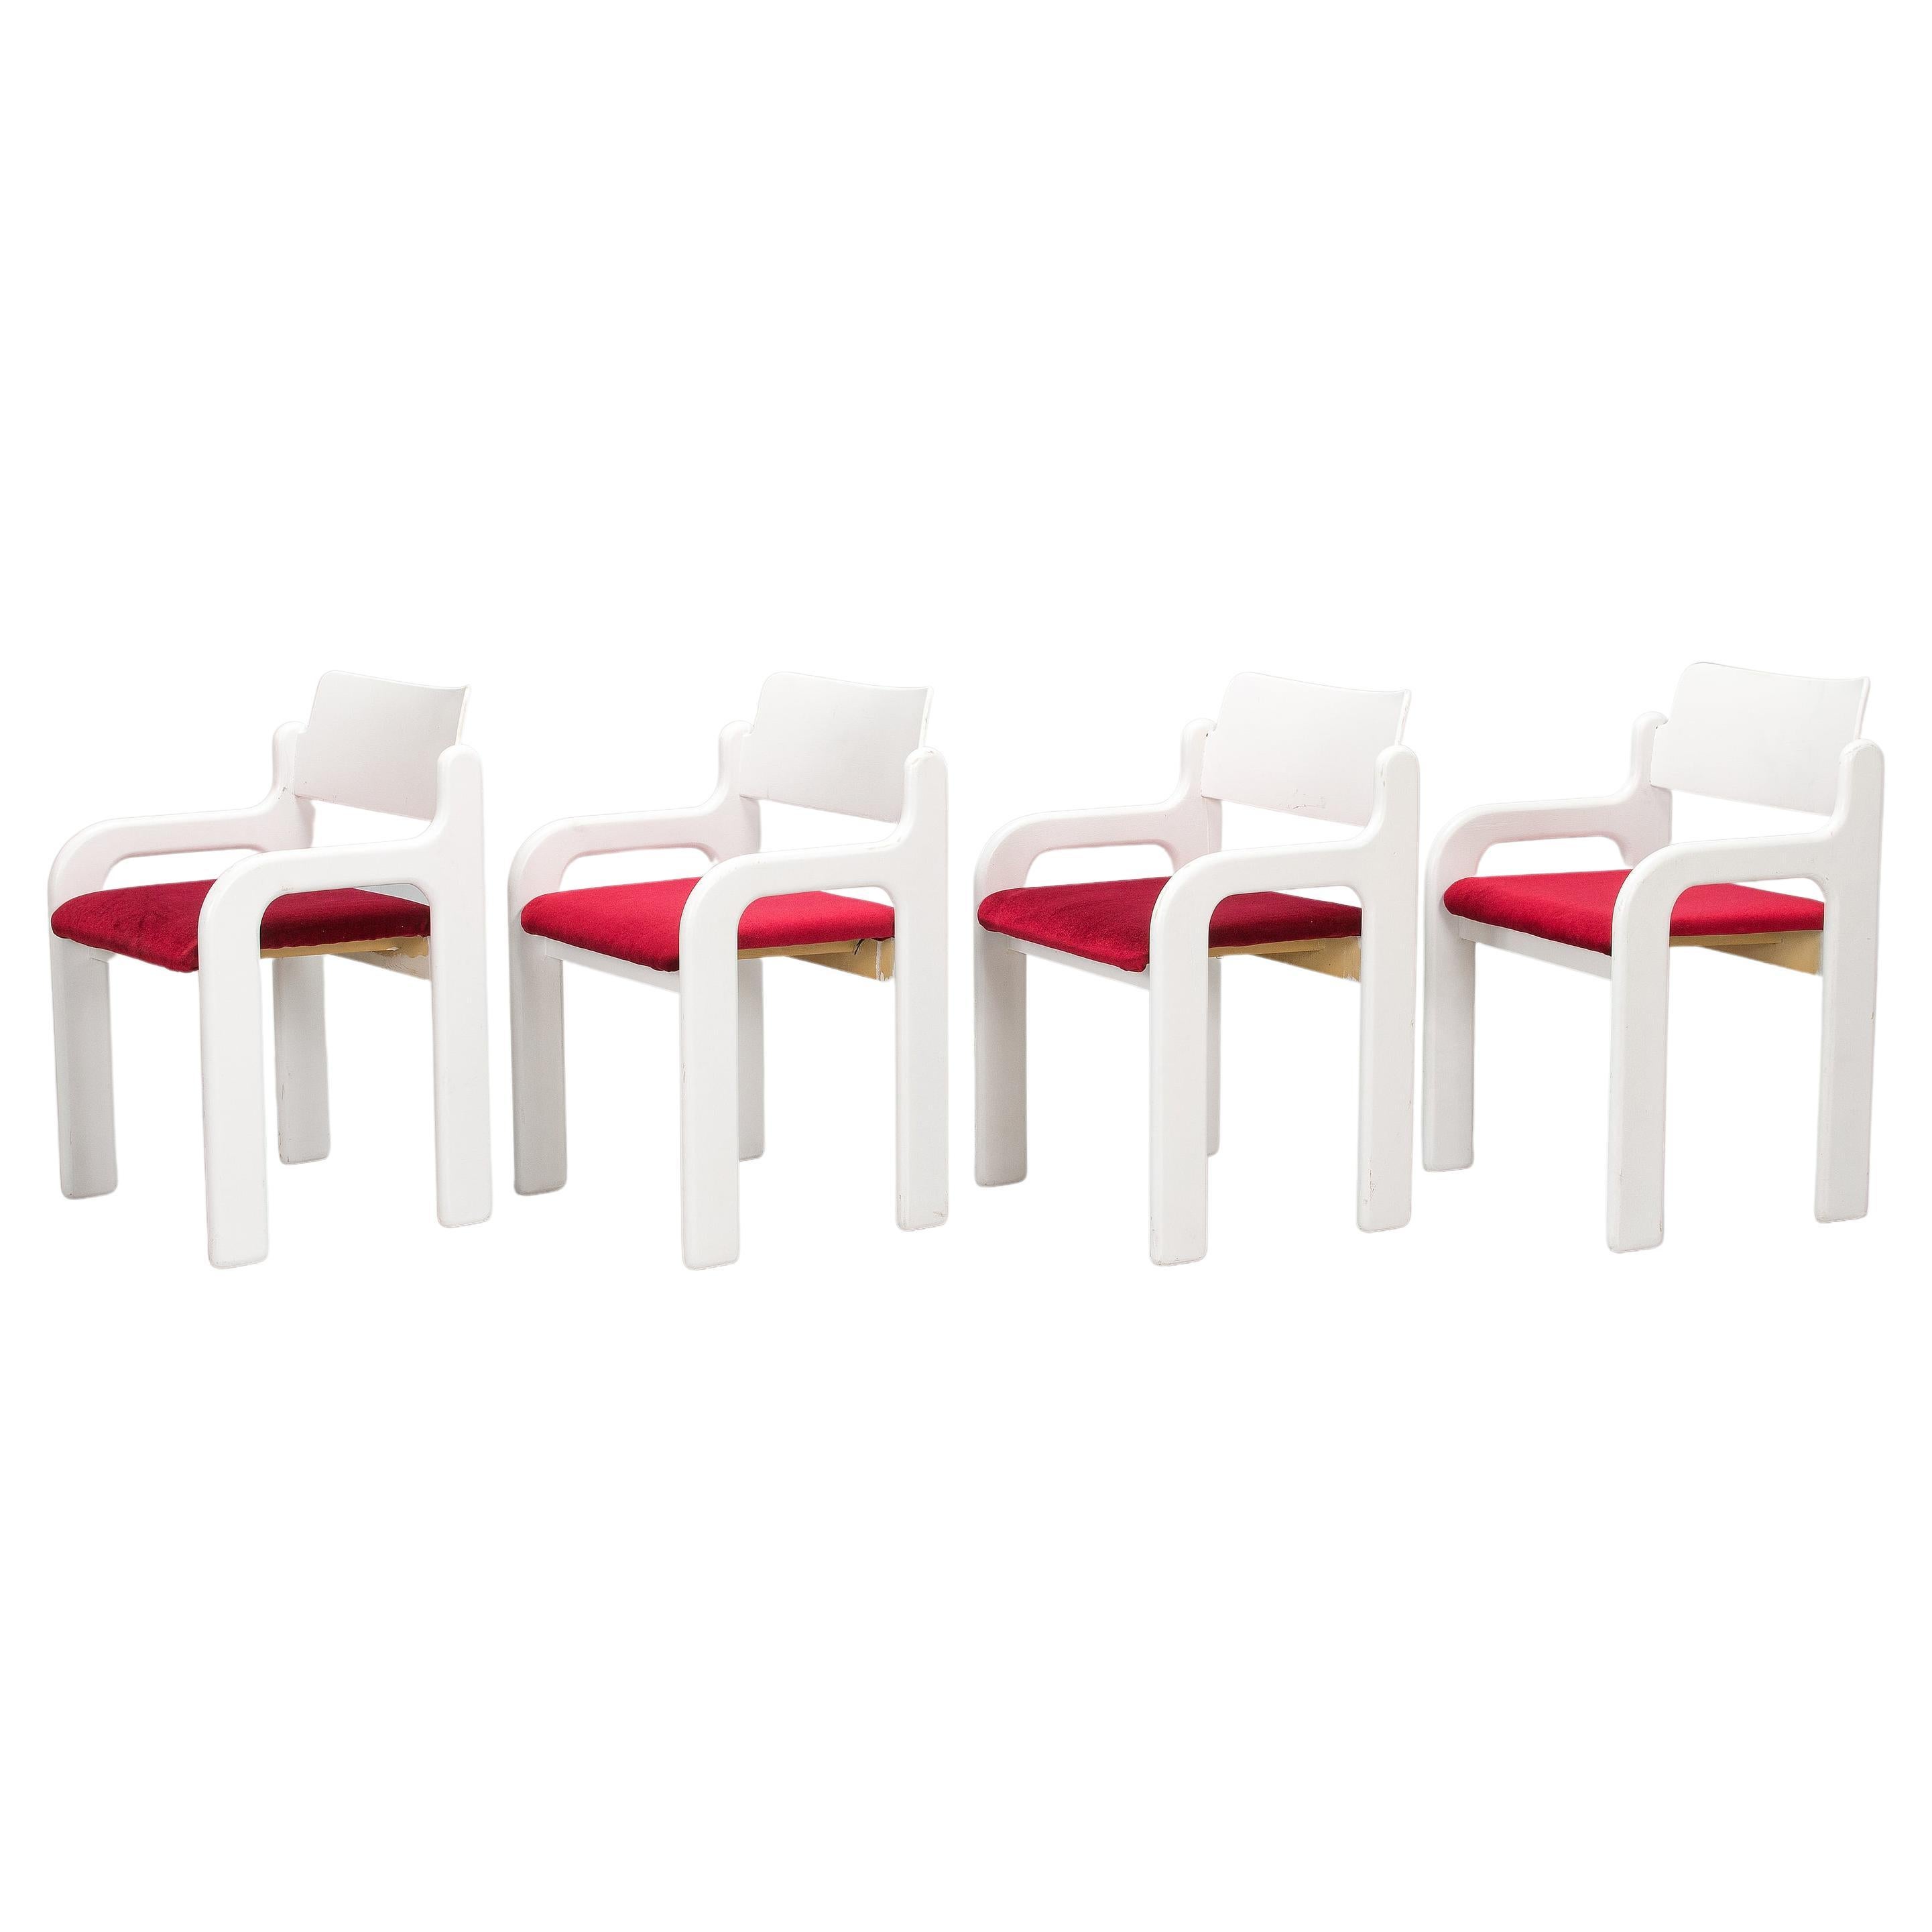 https://a.1stdibscdn.com/eero-aarnio-dining-chairs-flamingo-for-asko-set-of-4-finland-1970s-for-sale/f_78832/f_350621421688399670836/f_35062142_1688399671615_bg_processed.jpg